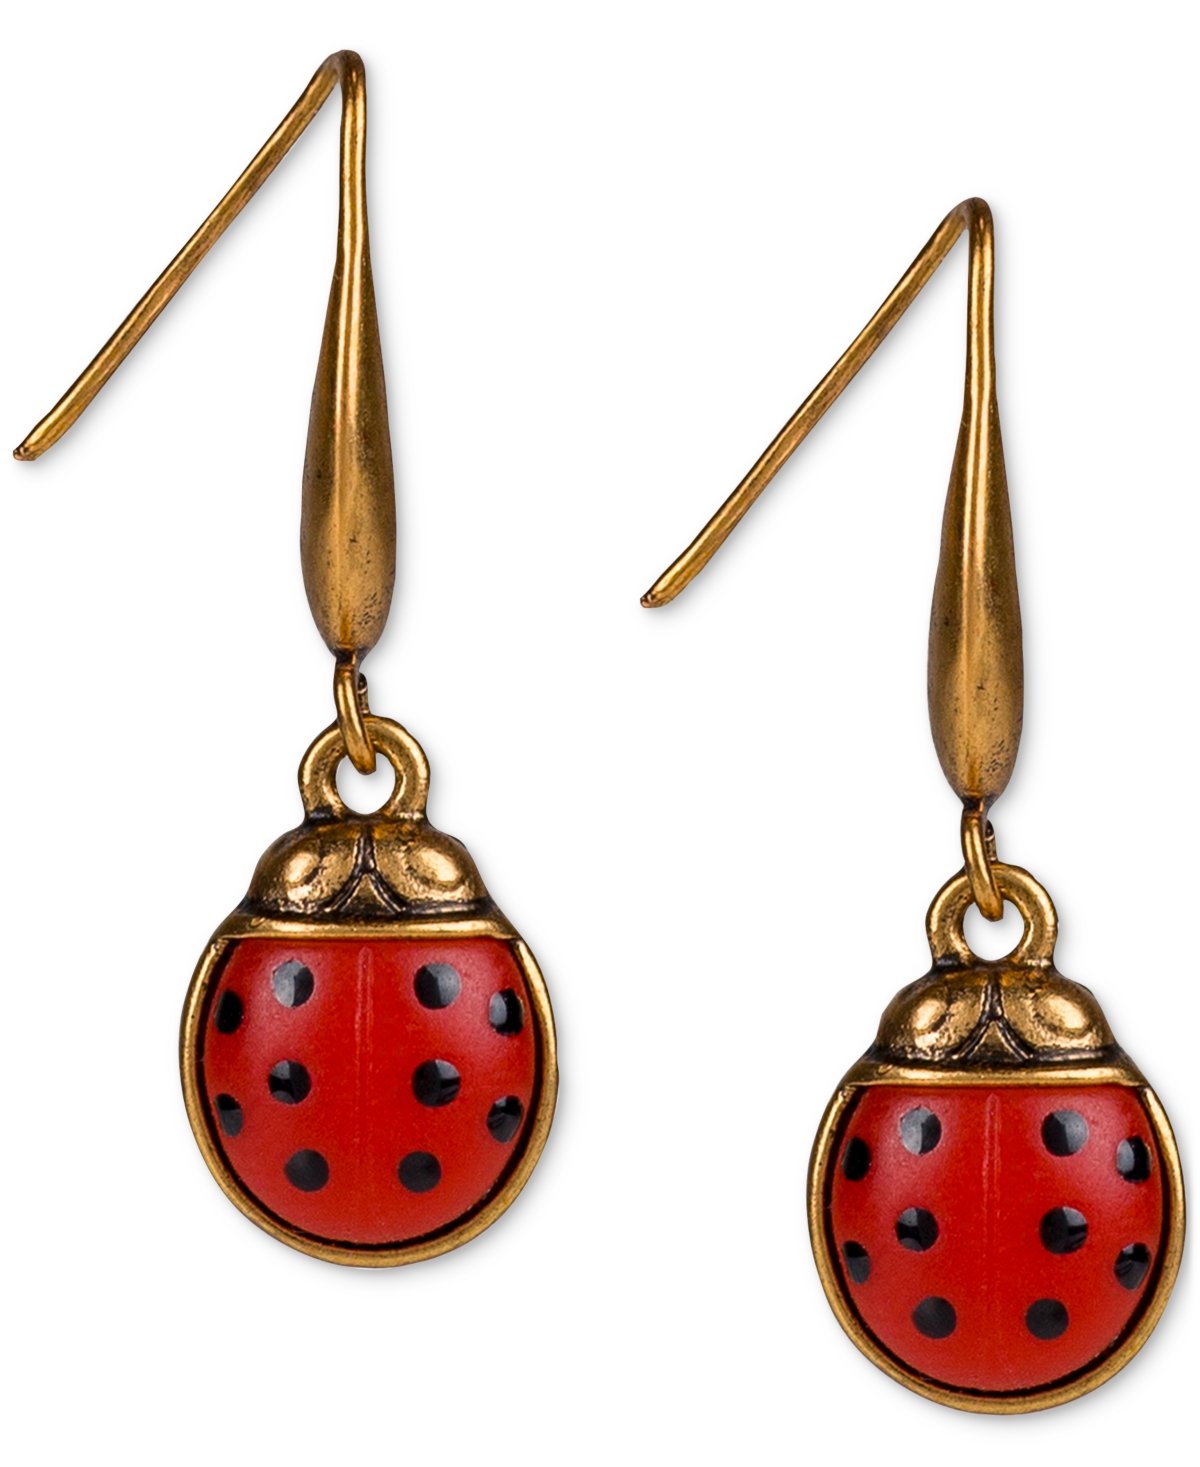 Gold-Tone Red Ladybug Drop Earrings - Antique Go